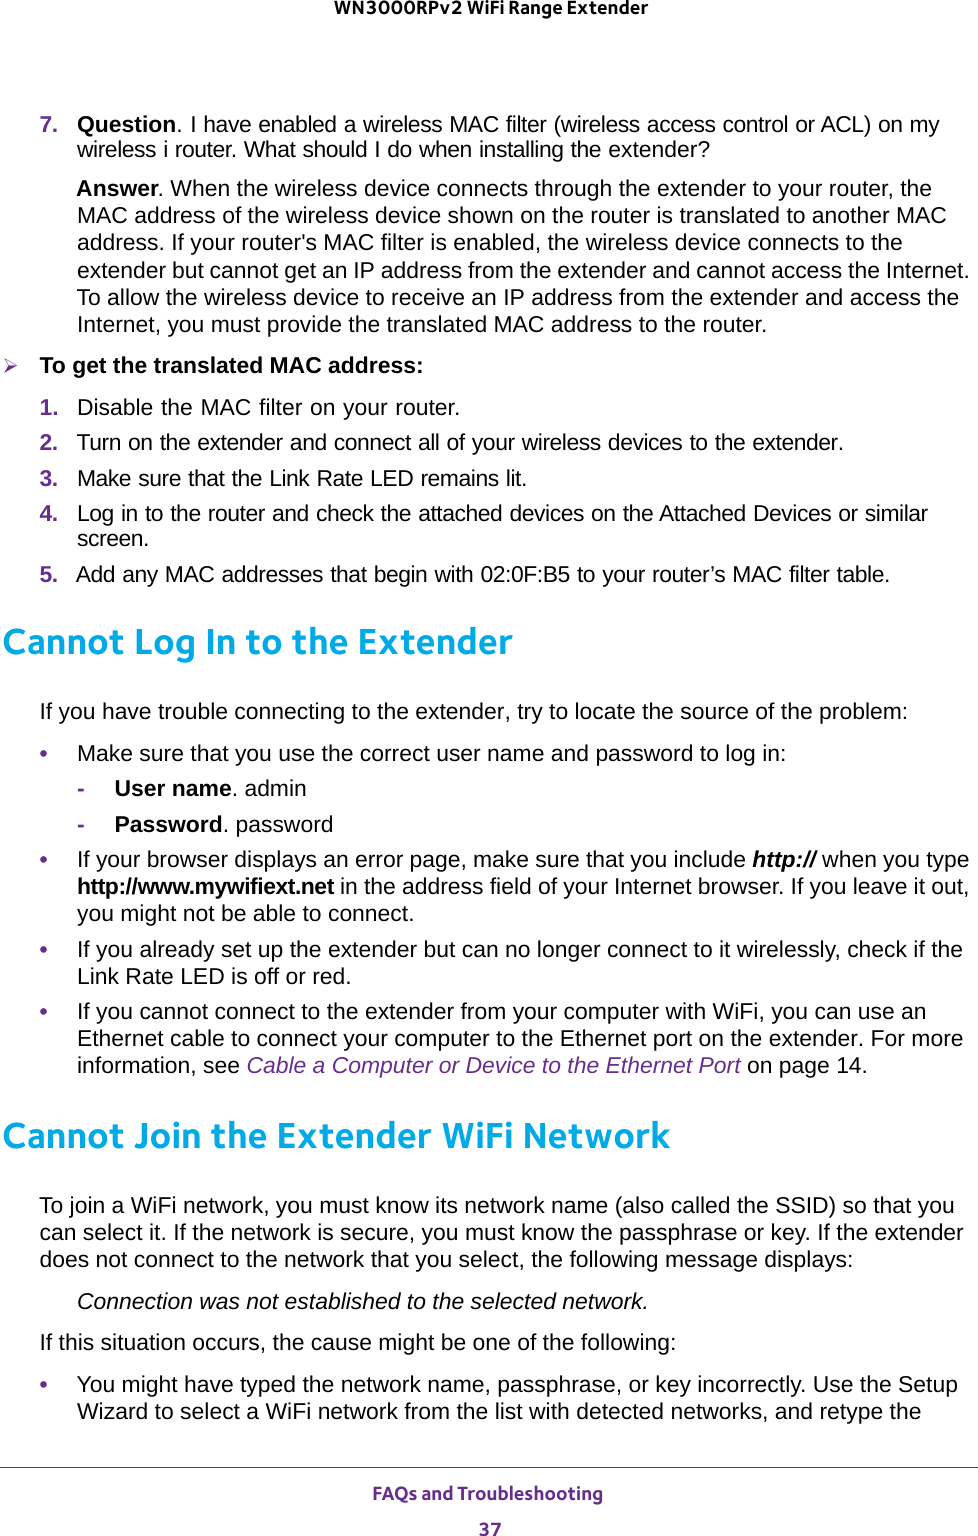 FAQs and Troubleshooting 37 WN3000RPv2 WiFi Range Extender7.  Question. I have enabled a wireless MAC filter (wireless access control or ACL) on my wireless i router. What should I do when installing the extender?Answer. When the wireless device connects through the extender to your router, the MAC address of the wireless device shown on the router is translated to another MAC address. If your router&apos;s MAC filter is enabled, the wireless device connects to the extender but cannot get an IP address from the extender and cannot access the Internet. To allow the wireless device to receive an IP address from the extender and access the Internet, you must provide the translated MAC address to the router.To get the translated MAC address:1.  Disable the MAC filter on your router.2.  Turn on the extender and connect all of your wireless devices to the extender.3.  Make sure that the Link Rate LED remains lit.4.  Log in to the router and check the attached devices on the Attached Devices or similar screen. 5.  Add any MAC addresses that begin with 02:0F:B5 to your router’s MAC filter table.Cannot Log In to the ExtenderIf you have trouble connecting to the extender, try to locate the source of the problem:•Make sure that you use the correct user name and password to log in:-User name. admin-Password. password•If your browser displays an error page, make sure that you include http:// when you type http://www.mywifiext.net in the address field of your Internet browser. If you leave it out, you might not be able to connect.•If you already set up the extender but can no longer connect to it wirelessly, check if the Link Rate LED is off or red. •If you cannot connect to the extender from your computer with WiFi, you can use an Ethernet cable to connect your computer to the Ethernet port on the extender. For more information, see Cable a Computer or Device to the Ethernet Port on page  14.Cannot Join the Extender WiFi NetworkTo join a WiFi network, you must know its network name (also called the SSID) so that you can select it. If the network is secure, you must know the passphrase or key. If the extender does not connect to the network that you select, the following message displays:Connection was not established to the selected network.If this situation occurs, the cause might be one of the following:•You might have typed the network name, passphrase, or key incorrectly. Use the Setup Wizard to select a WiFi network from the list with detected networks, and retype the 